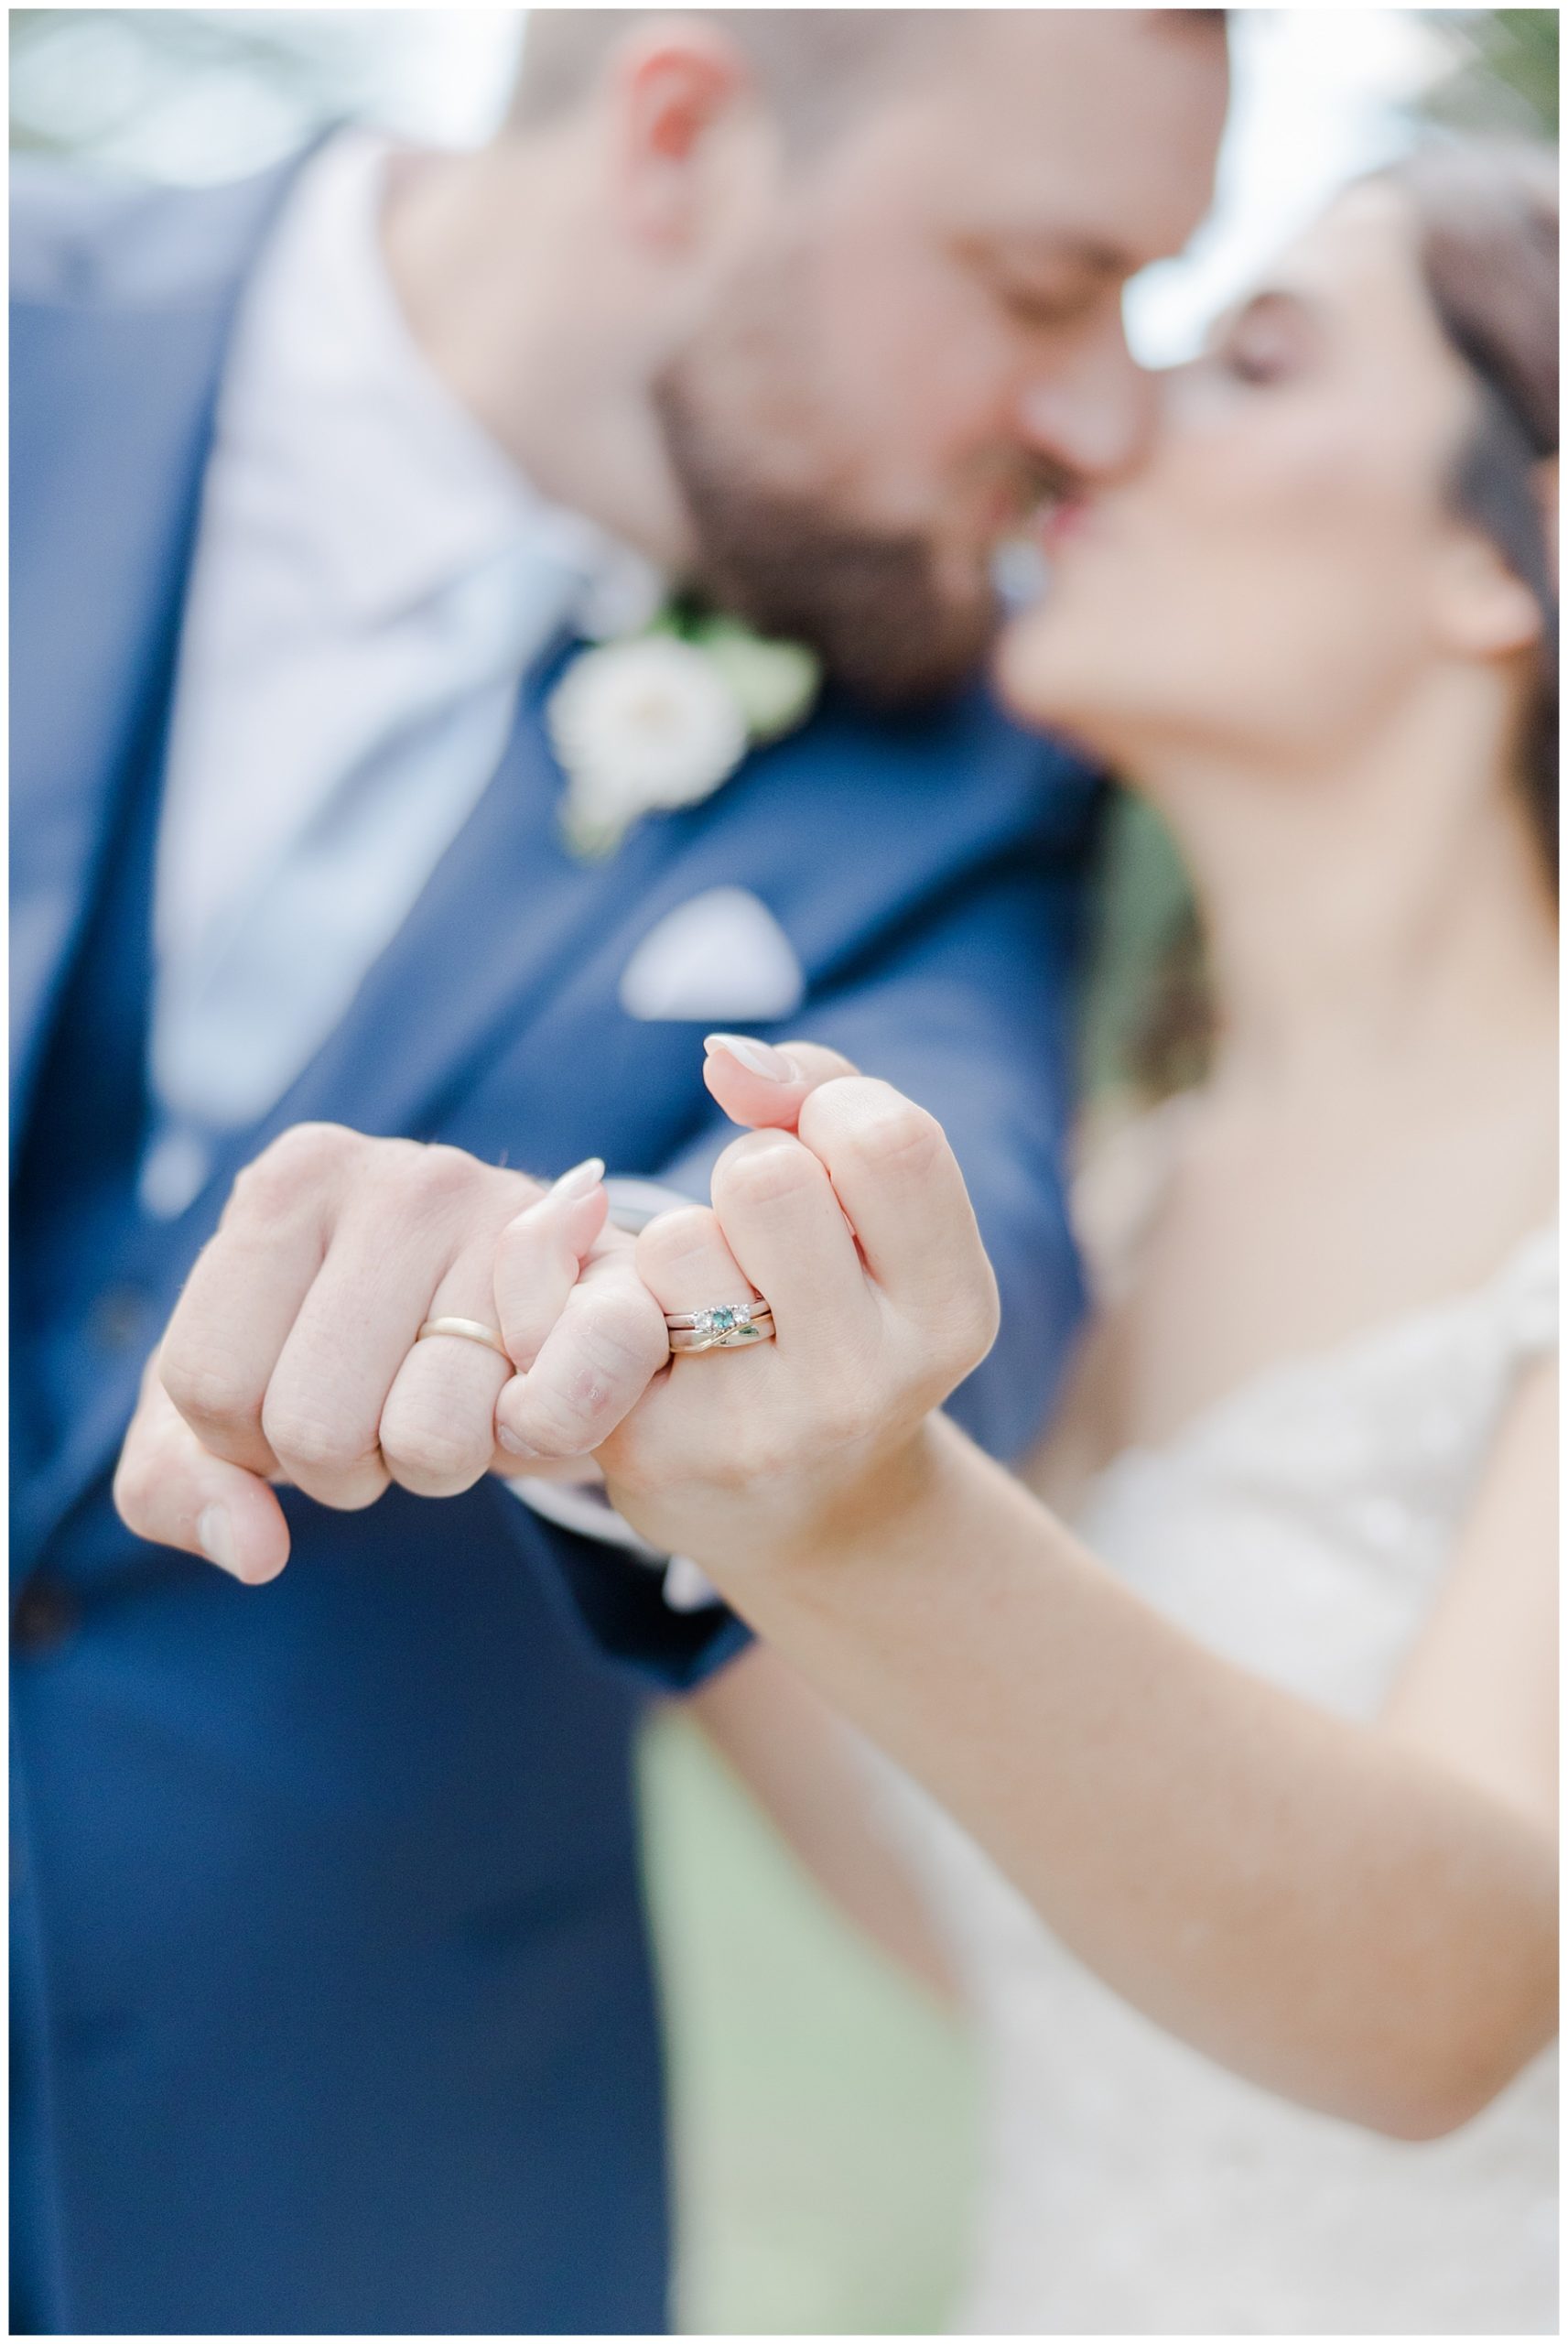 newlyweds kiss as they lock pinkies and show off wedding rings after Elegant New Hampshire Wedding ceremony